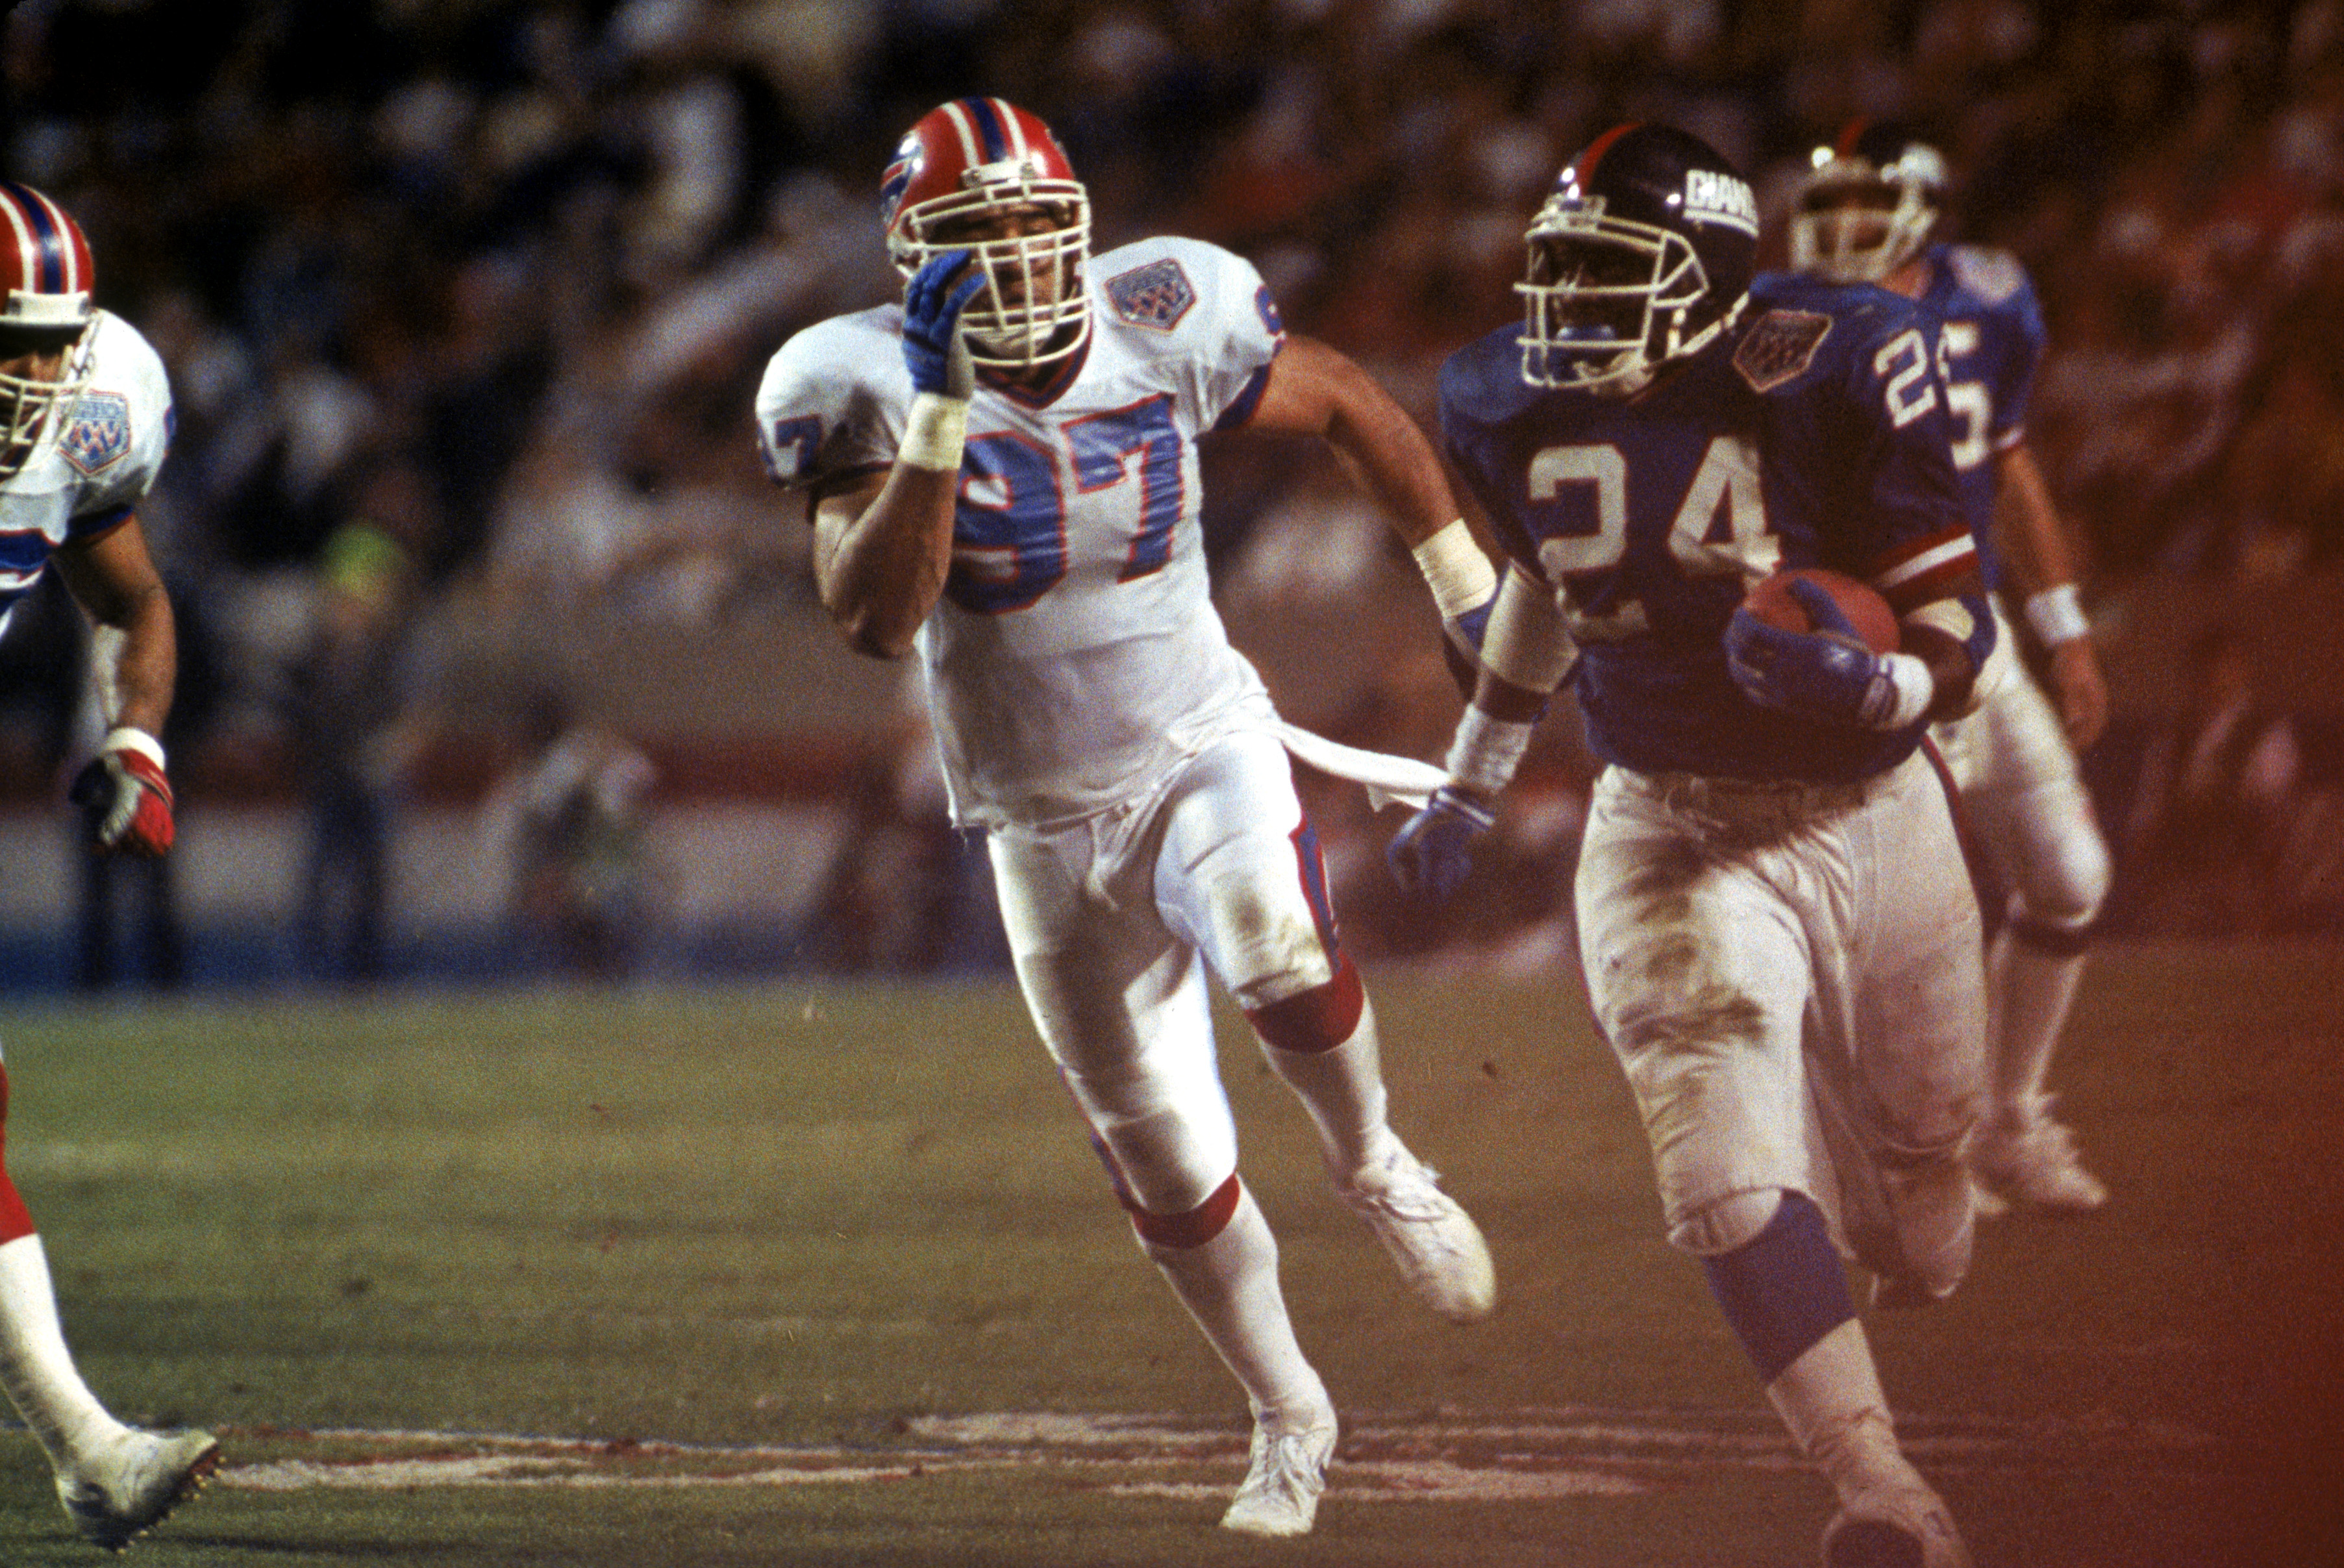 TAMPA, FL - JANUARY 27:  Running back Ottis Anderson #24 of the New York Giants carries the ball against linebacker Cornelius Bennett #97 of the Buffalo Bills during Super Bowl XXV at Tampa Stadium on January 27, 1991 in Tampa, Florida. The Giants defeate